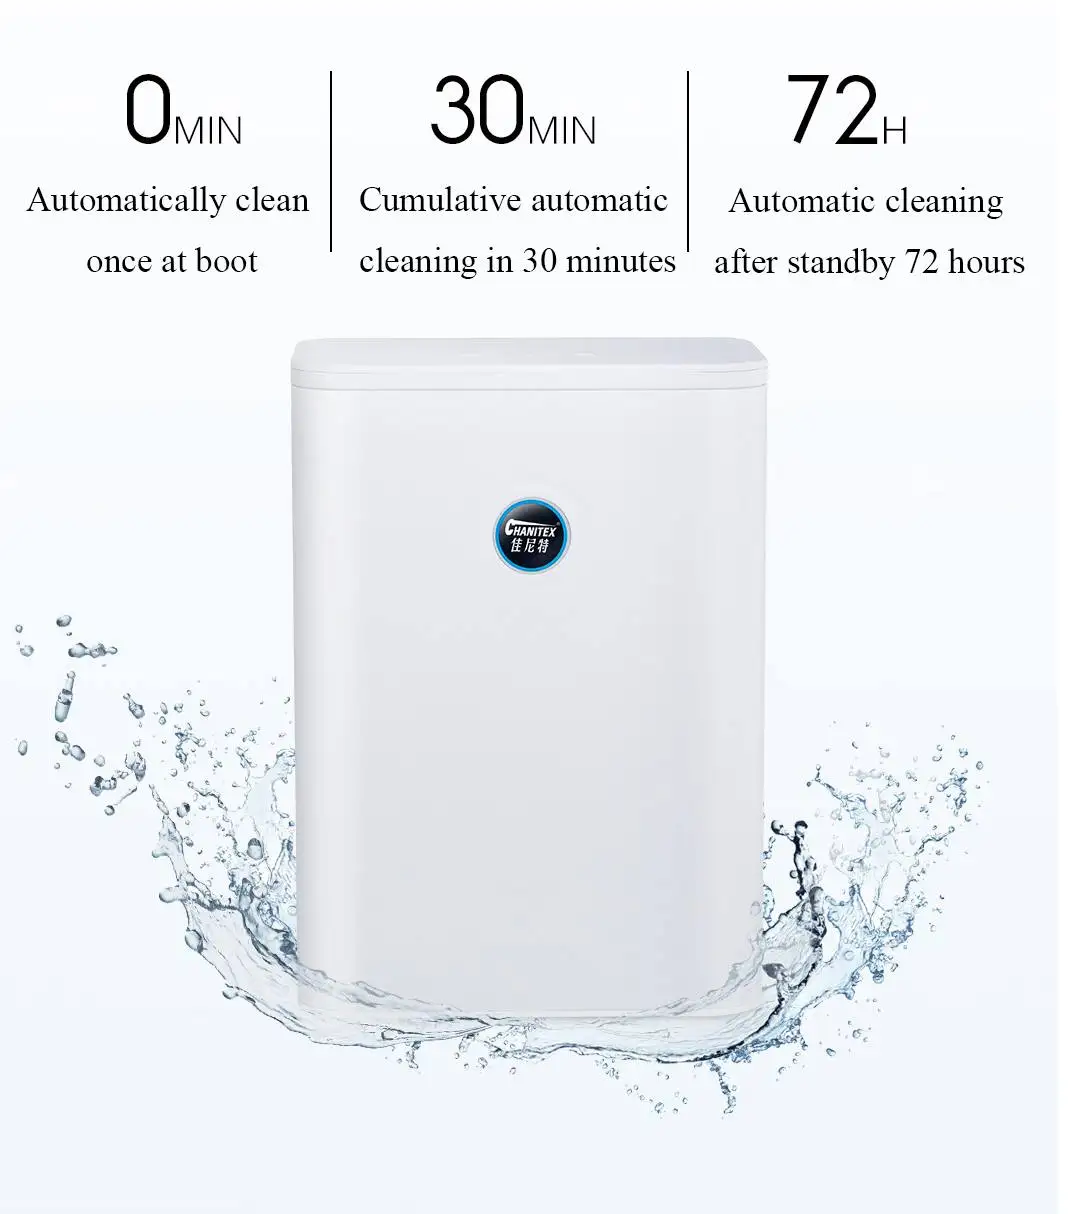 Youpin CHANITEX Smart Water Purifier Mijia Home Water Filters Clean Health RO Purification Reverse Osmosis Technology